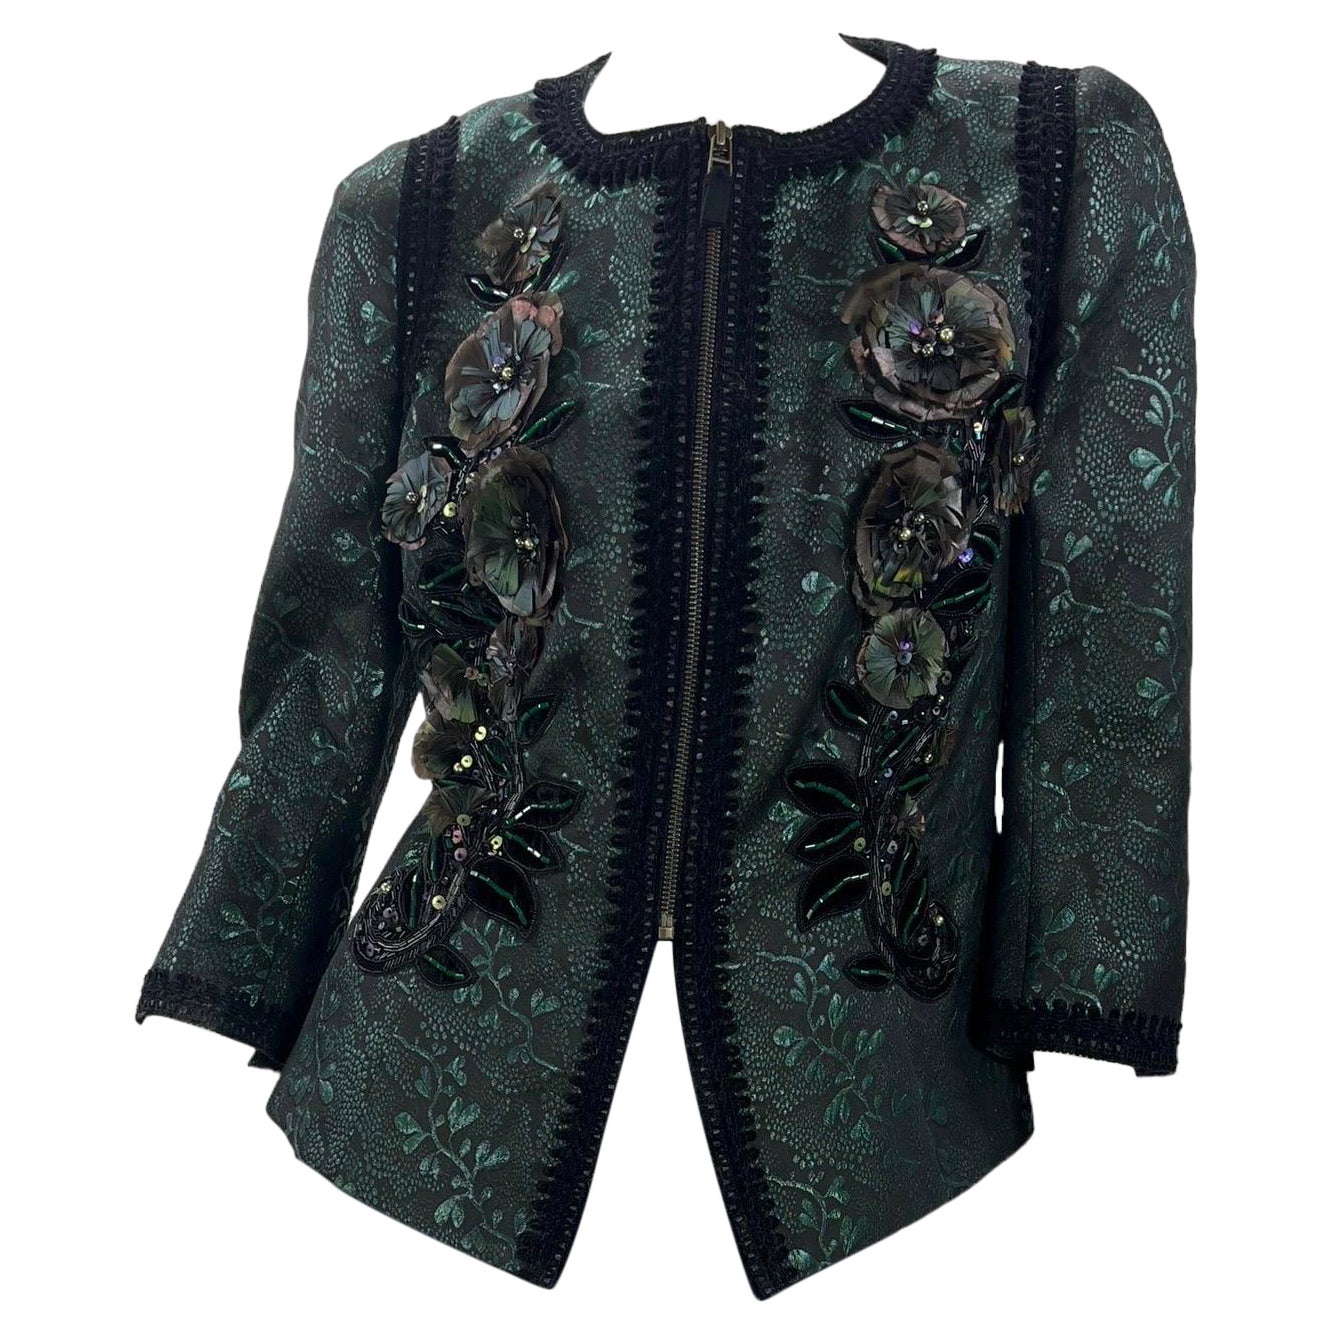 Andrew Gn Beaded & Feather Embellished Emerald Green Evening Blazer Jacket Fr 44 For Sale